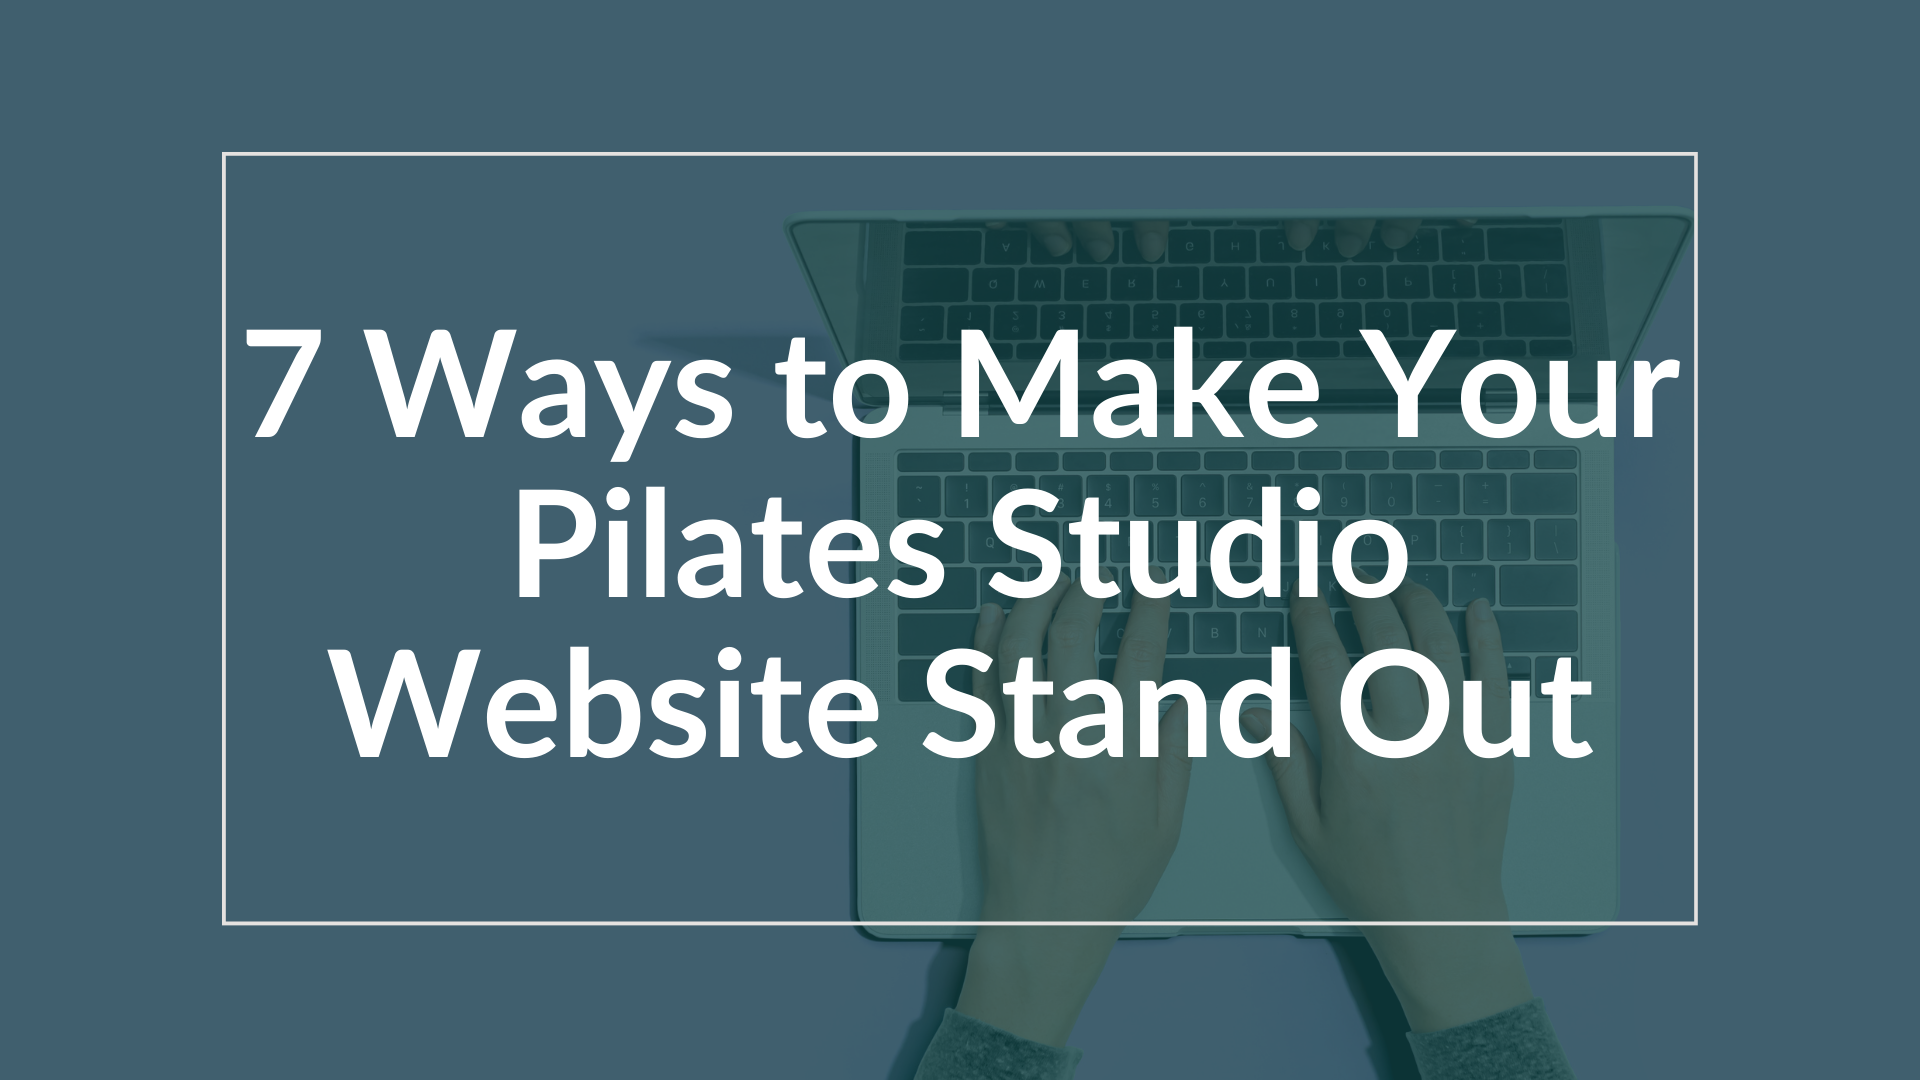 7 Ways to Make Your Pilates Studio Website Stand Out